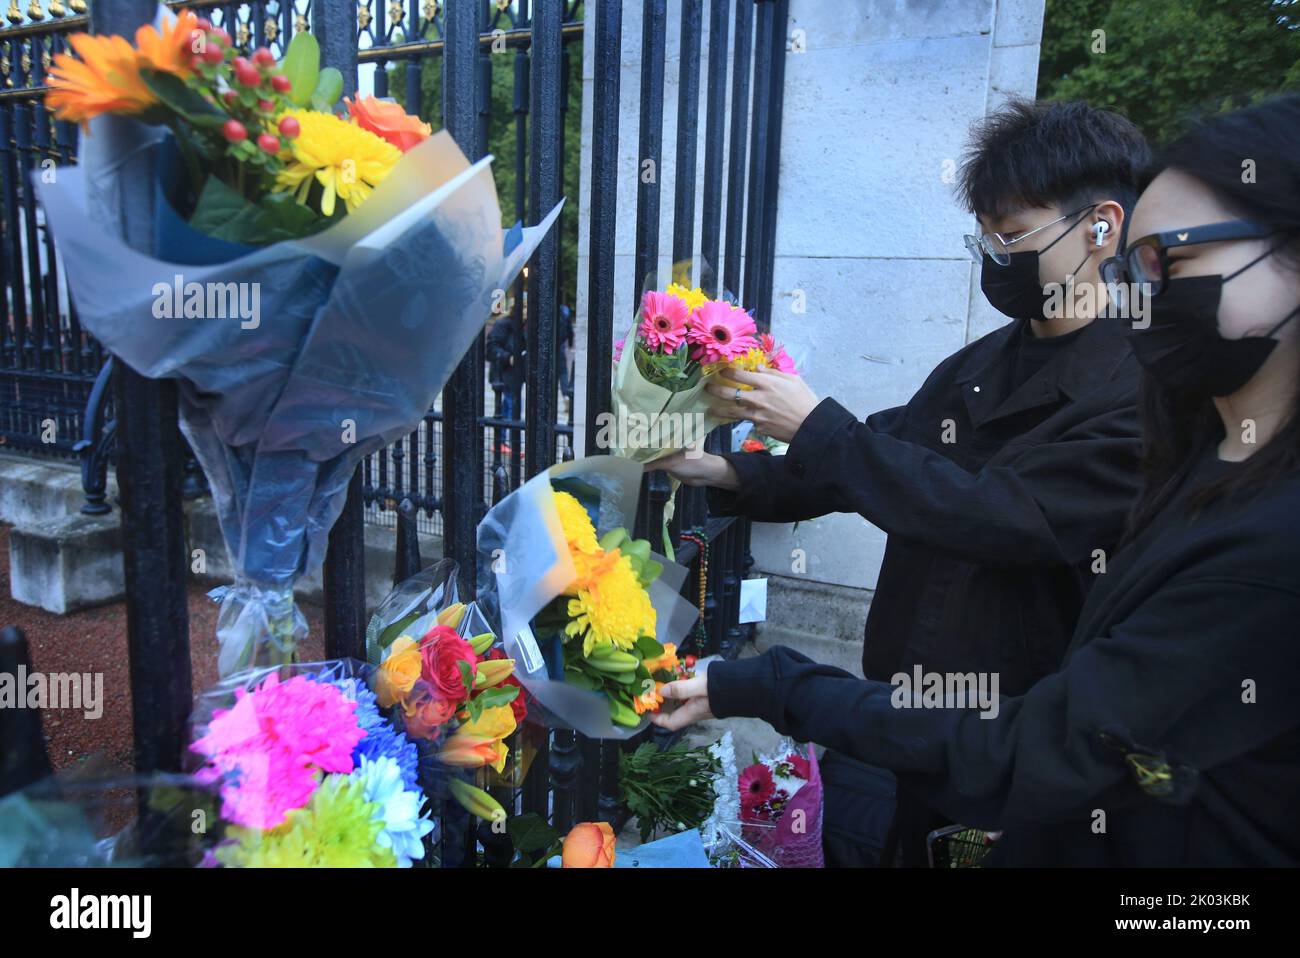 London, UK. 09th Sep, 2022. Members of the public come from all over UK to leave floral tributes outside the gates of Buckingham Palace. Her Majesty Queen Elizabeth II has died at Balmoral Castle at the age of 96, having reigned over the United Kingdom for 70 years. Credit: SOPA Images Limited/Alamy Live News Stock Photo